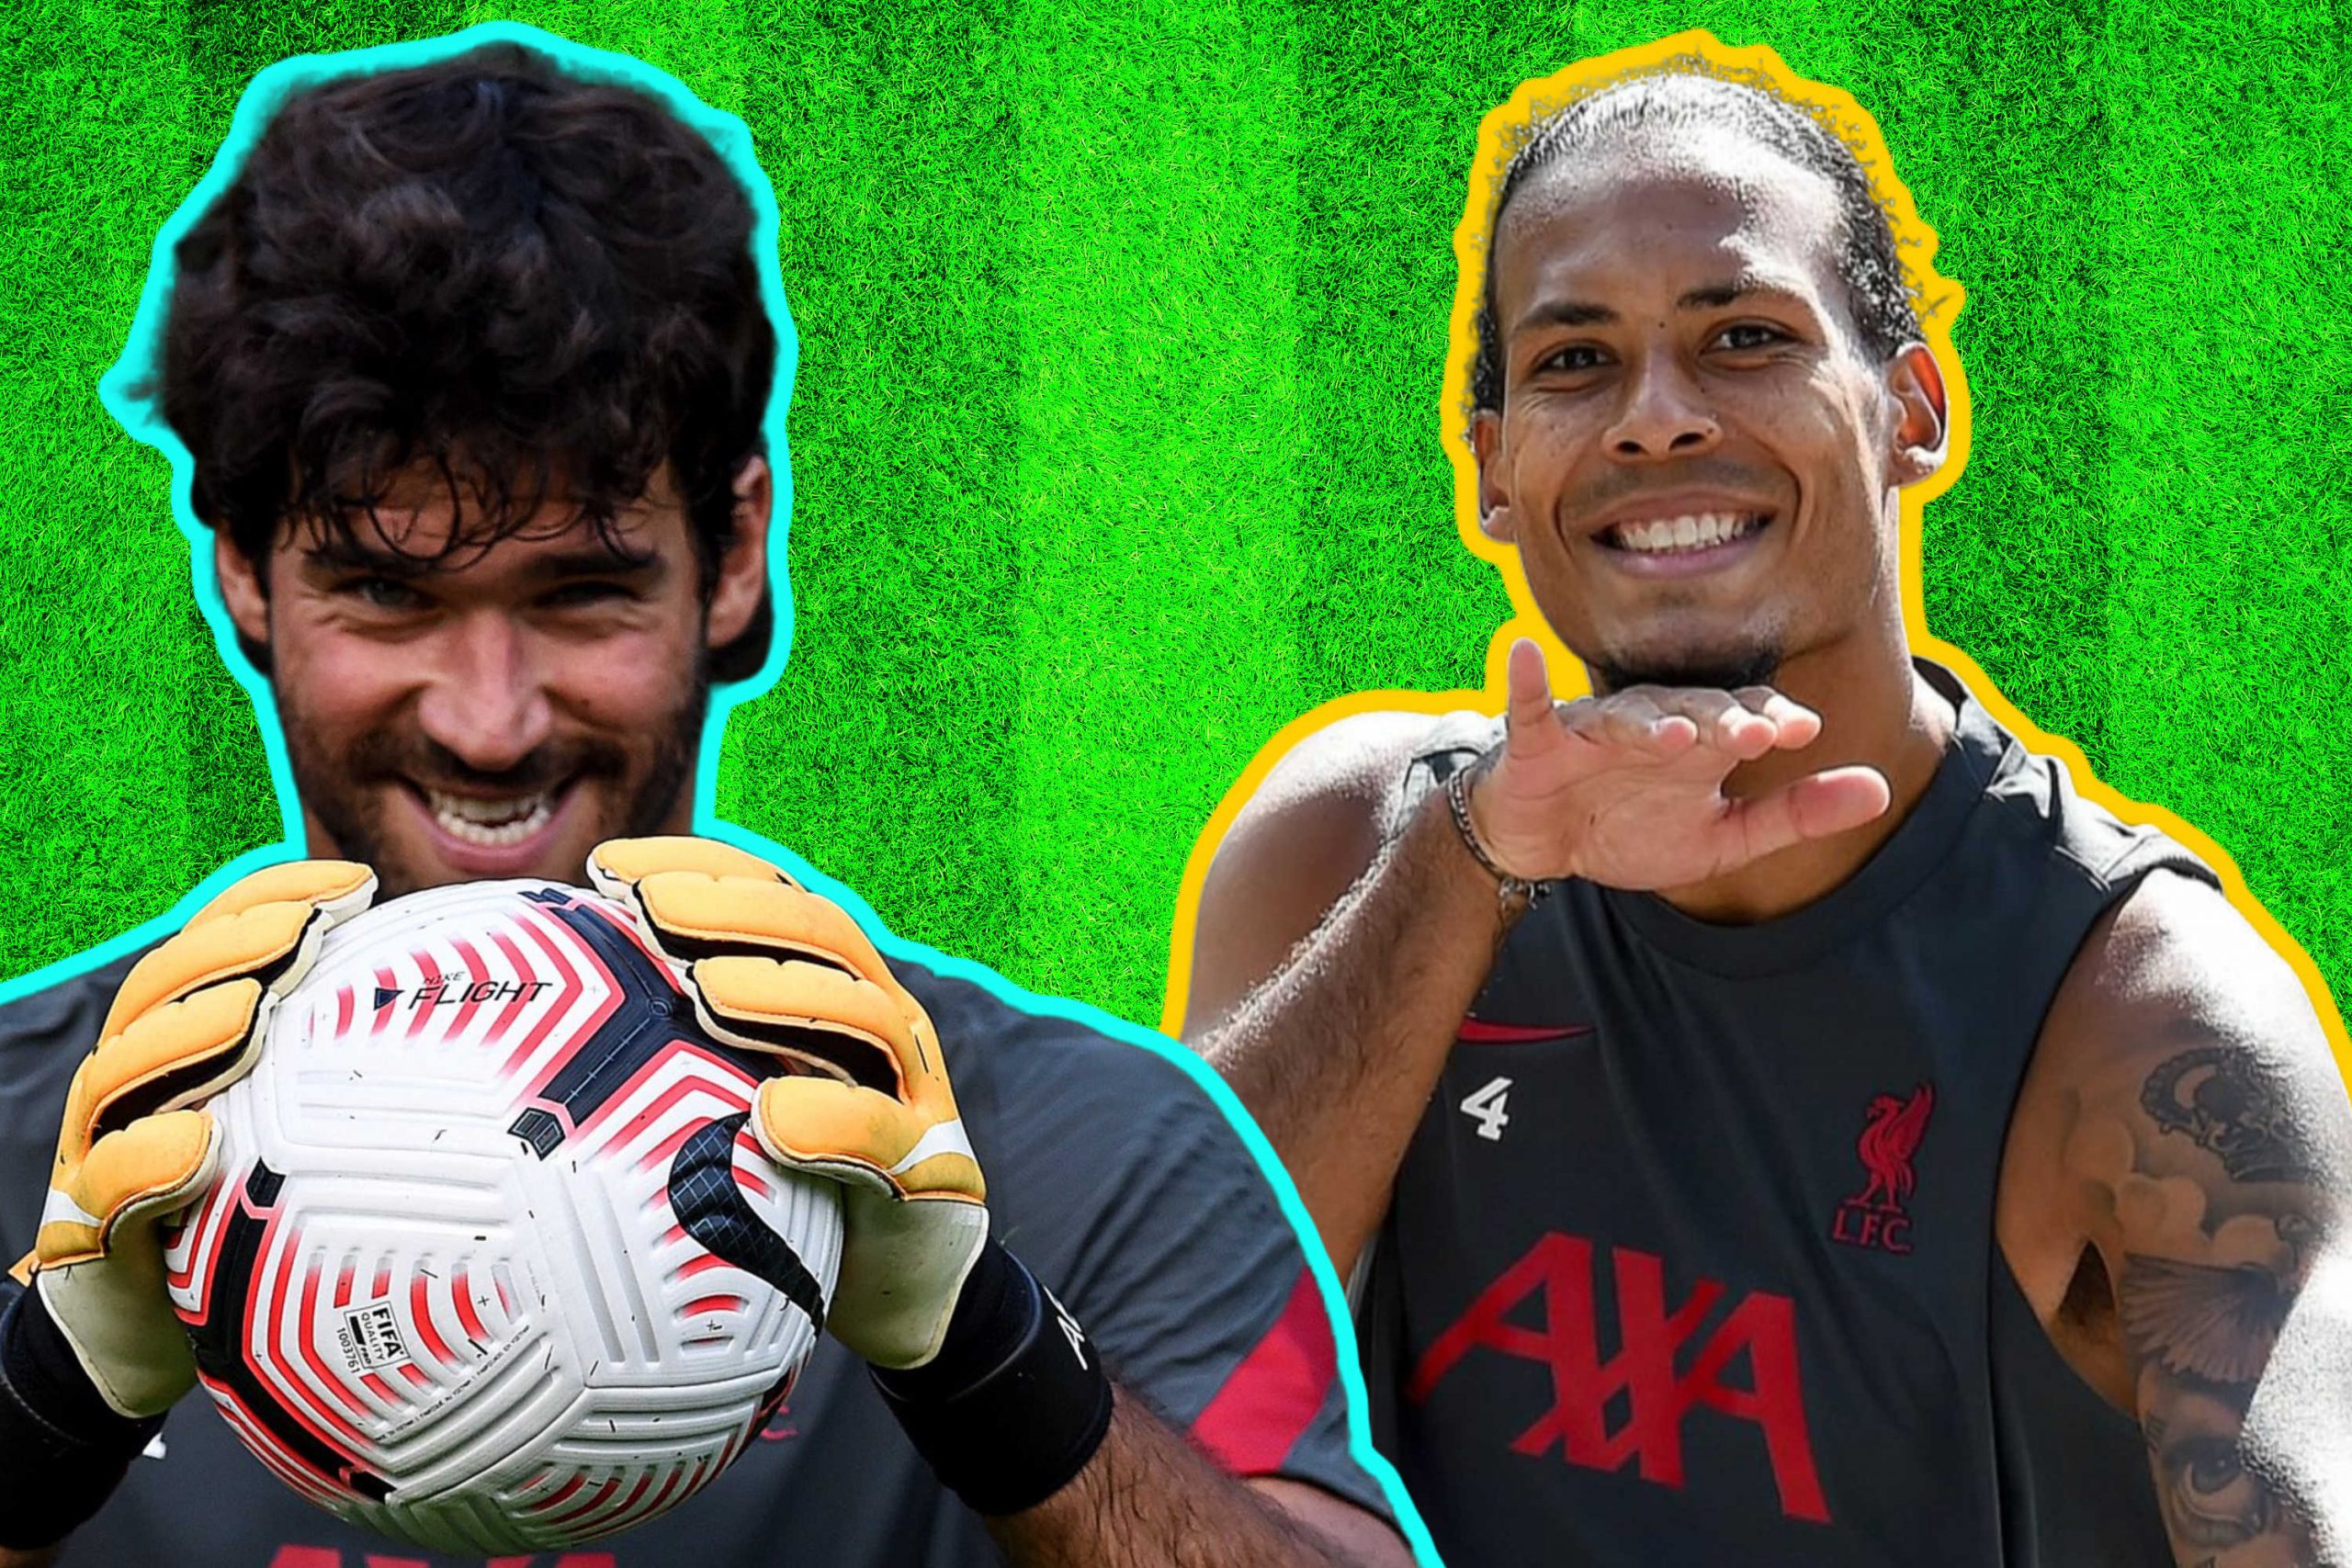 Liverpool look ready for new season as Van Dijk shows off his instinct for goal and Alisson makes inhuman saves in training